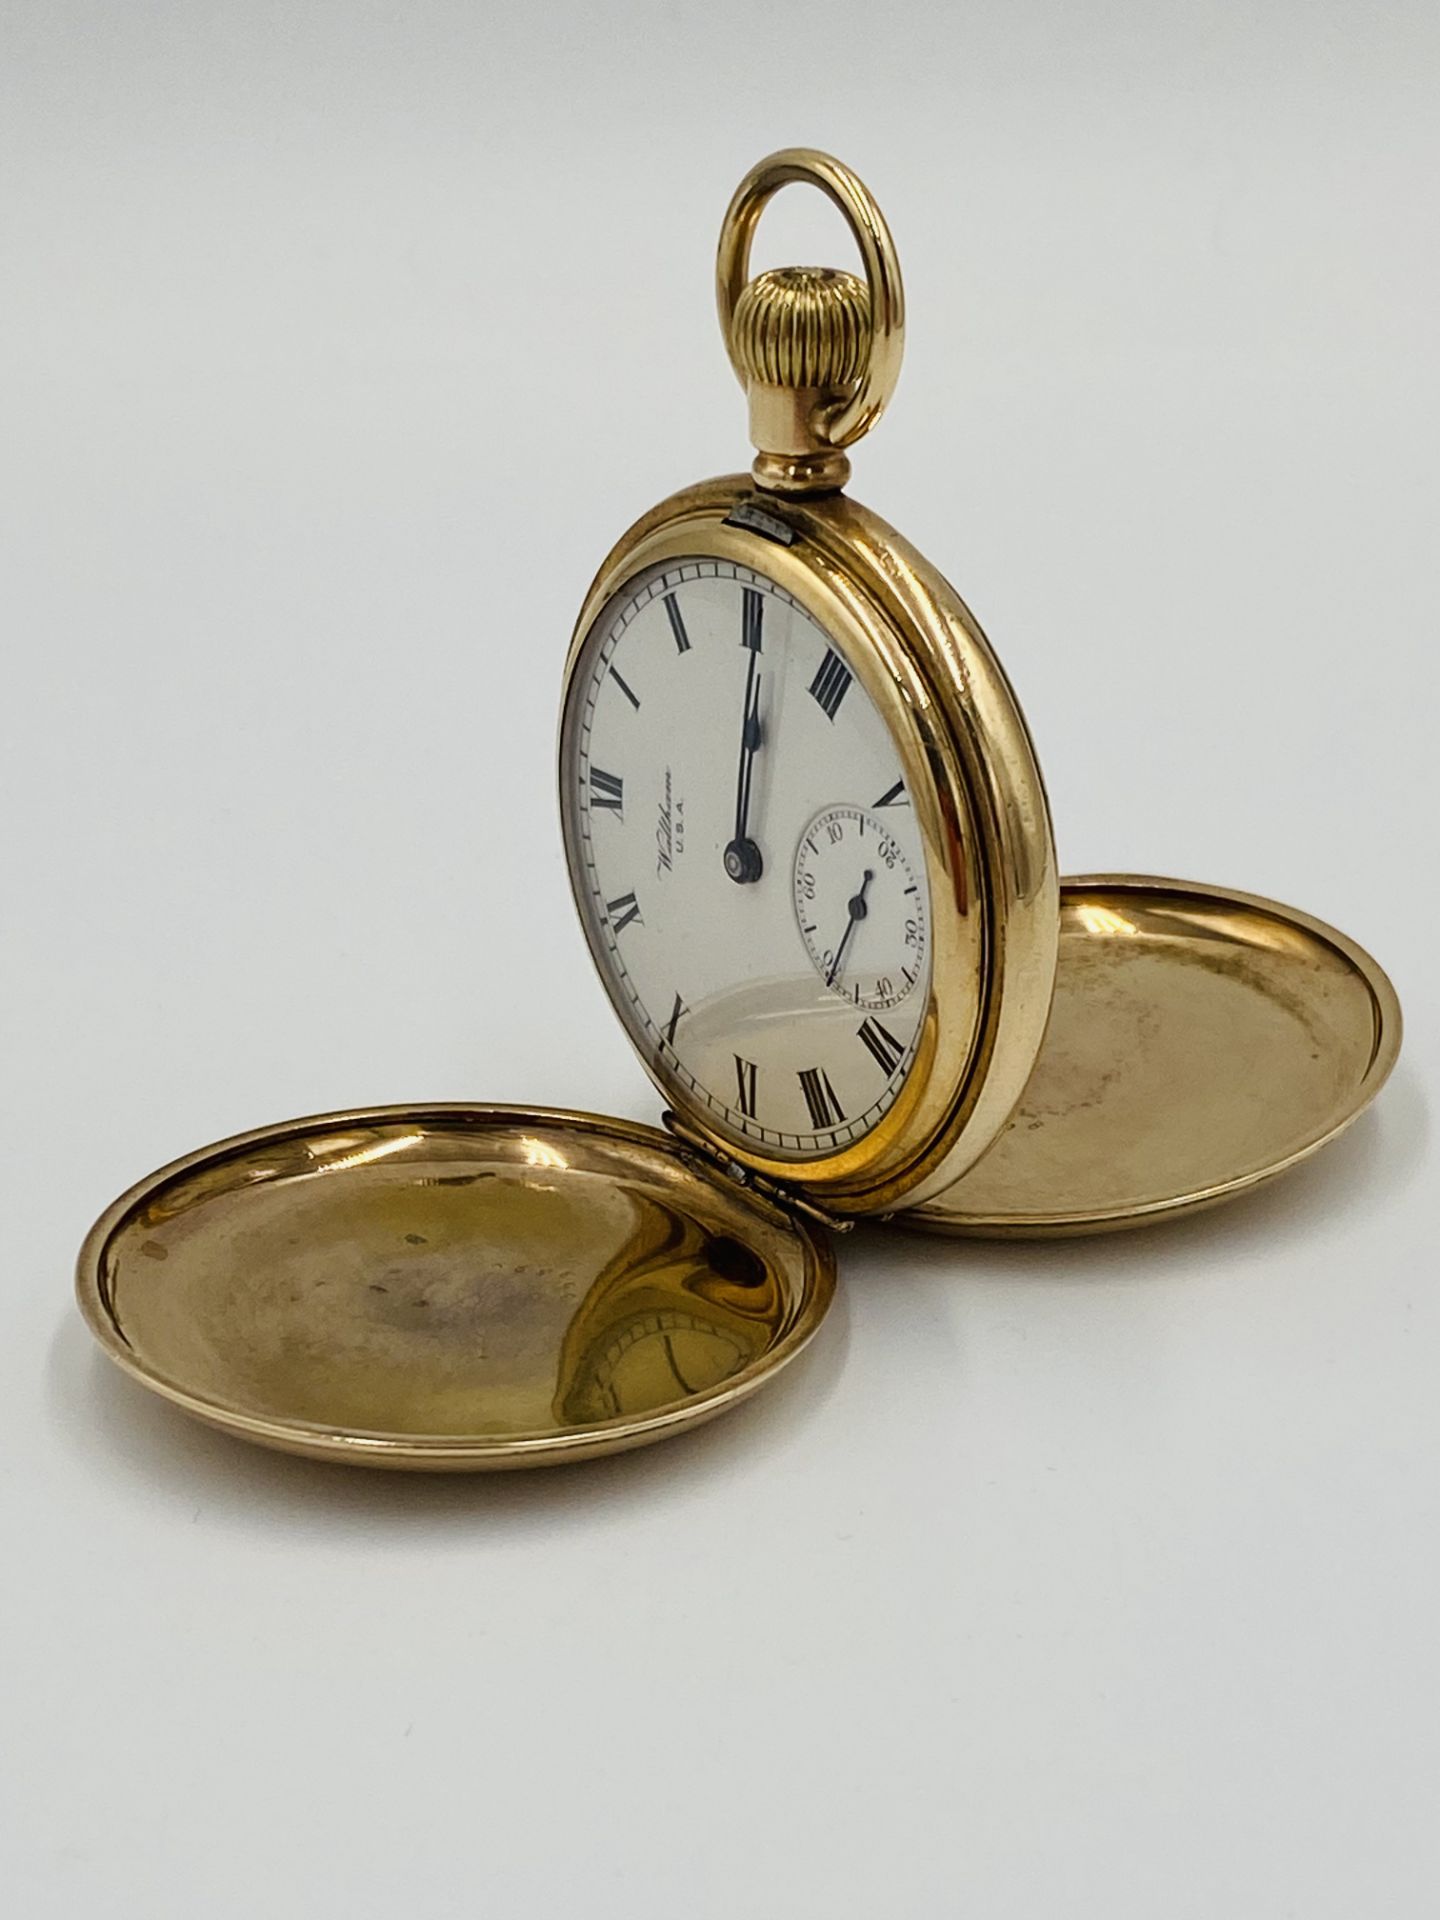 Gold plated pocket watch - Image 2 of 6